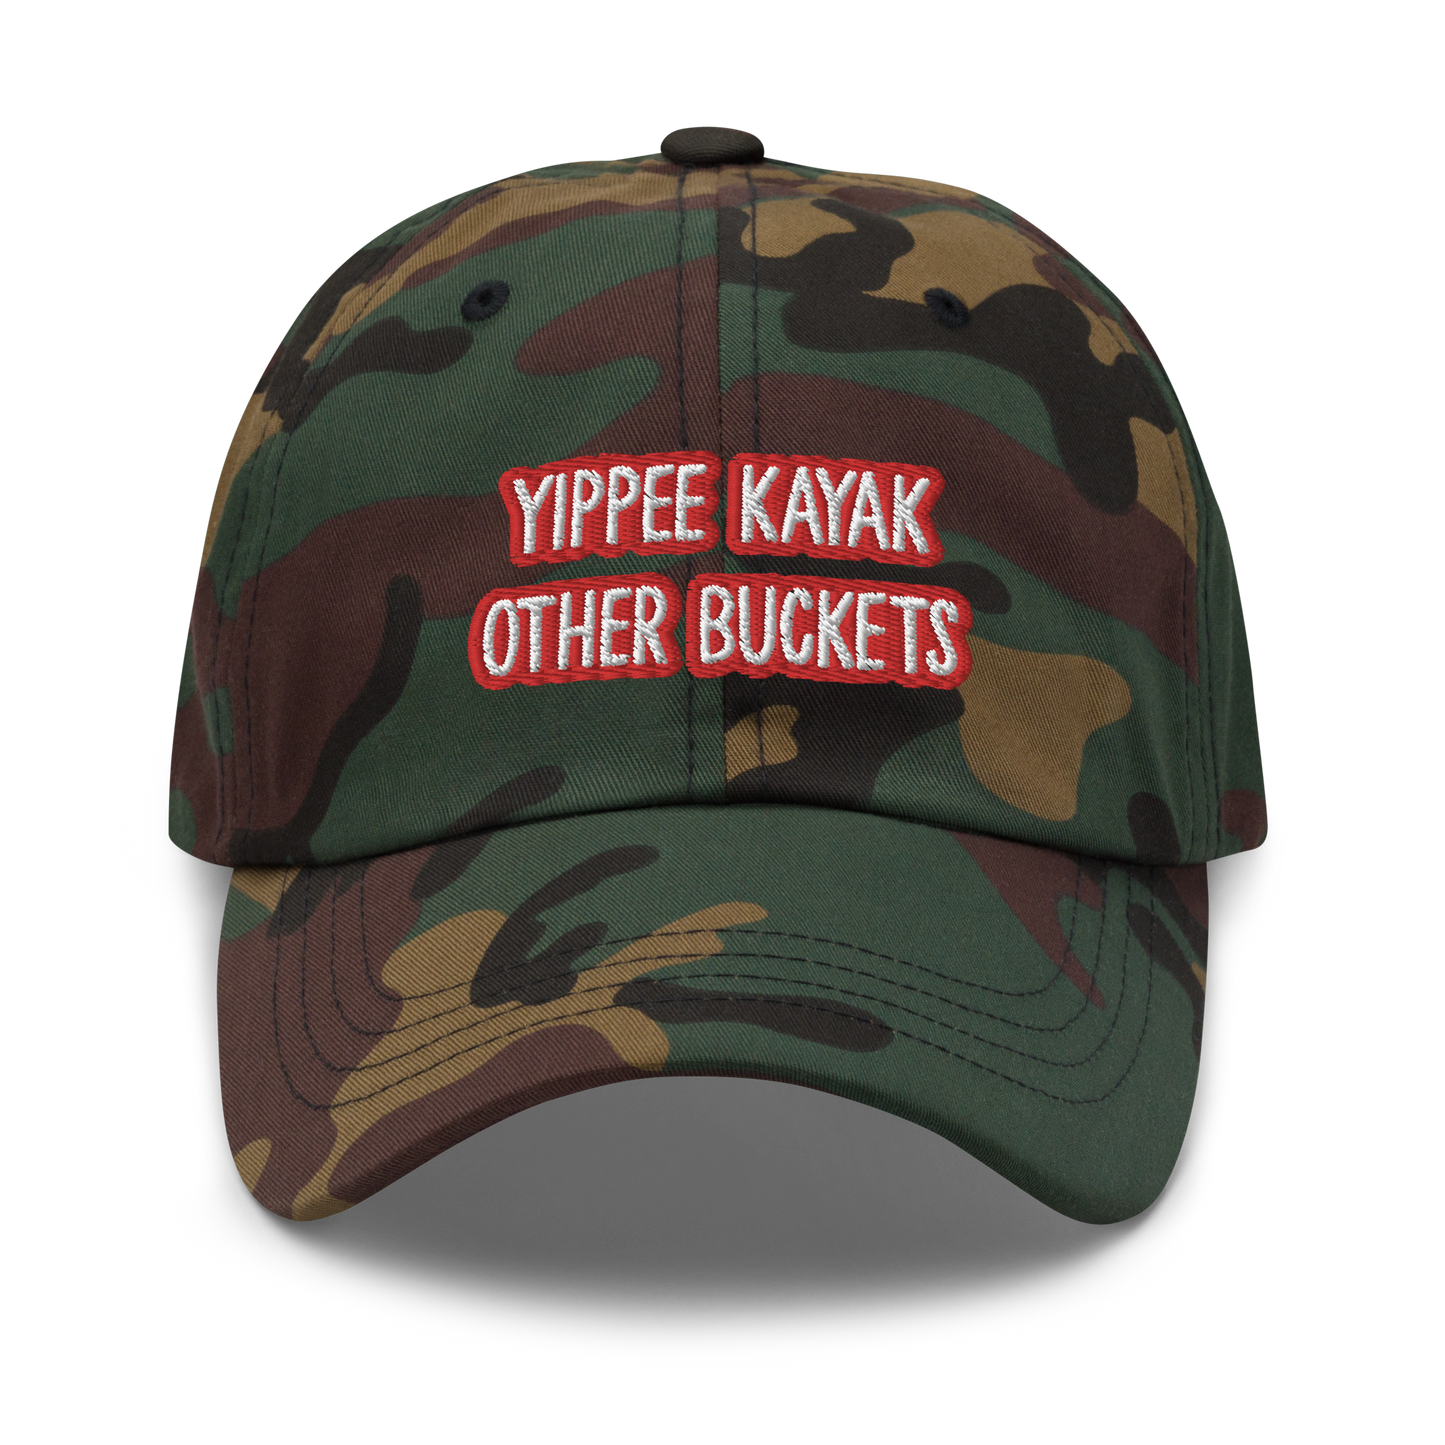 Yippee Kayak Other Buckets Dad hat